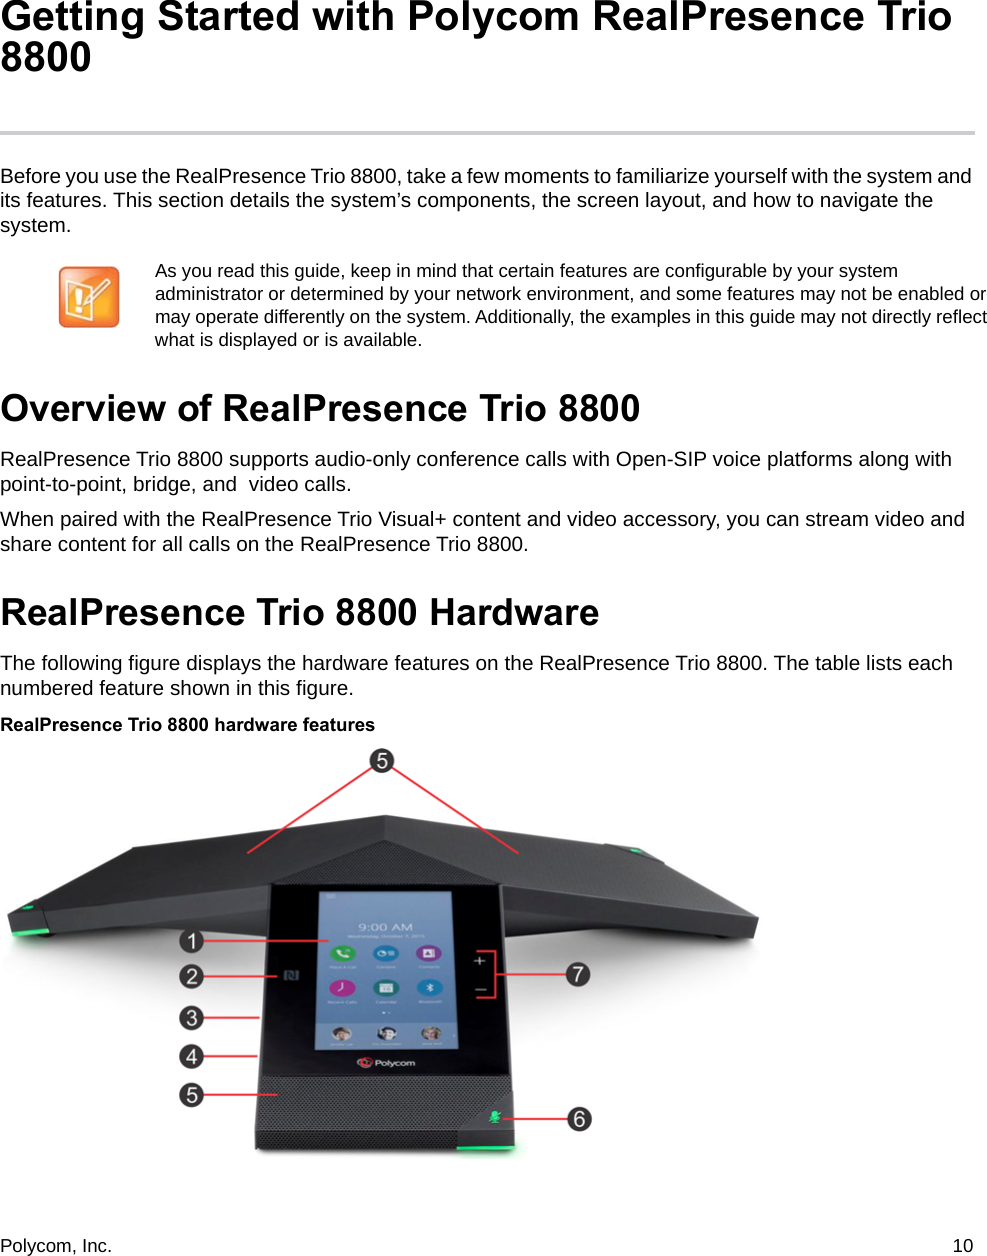 Polycom, Inc.  10 Getting Started with Polycom RealPresence Trio 8800Before you use the RealPresence Trio 8800, take a few moments to familiarize yourself with the system and its features. This section details the system’s components, the screen layout, and how to navigate the system. Overview of RealPresence Trio 8800RealPresence Trio 8800 supports audio-only conference calls with Open-SIP voice platforms along with point-to-point, bridge, and  video calls. When paired with the RealPresence Trio Visual+ content and video accessory, you can stream video and share content for all calls on the RealPresence Trio 8800.RealPresence Trio 8800 HardwareThe following figure displays the hardware features on the RealPresence Trio 8800. The table lists each numbered feature shown in this figure.RealPresence Trio 8800 hardware featuresAs you read this guide, keep in mind that certain features are configurable by your system administrator or determined by your network environment, and some features may not be enabled or may operate differently on the system. Additionally, the examples in this guide may not directly reflect what is displayed or is available.